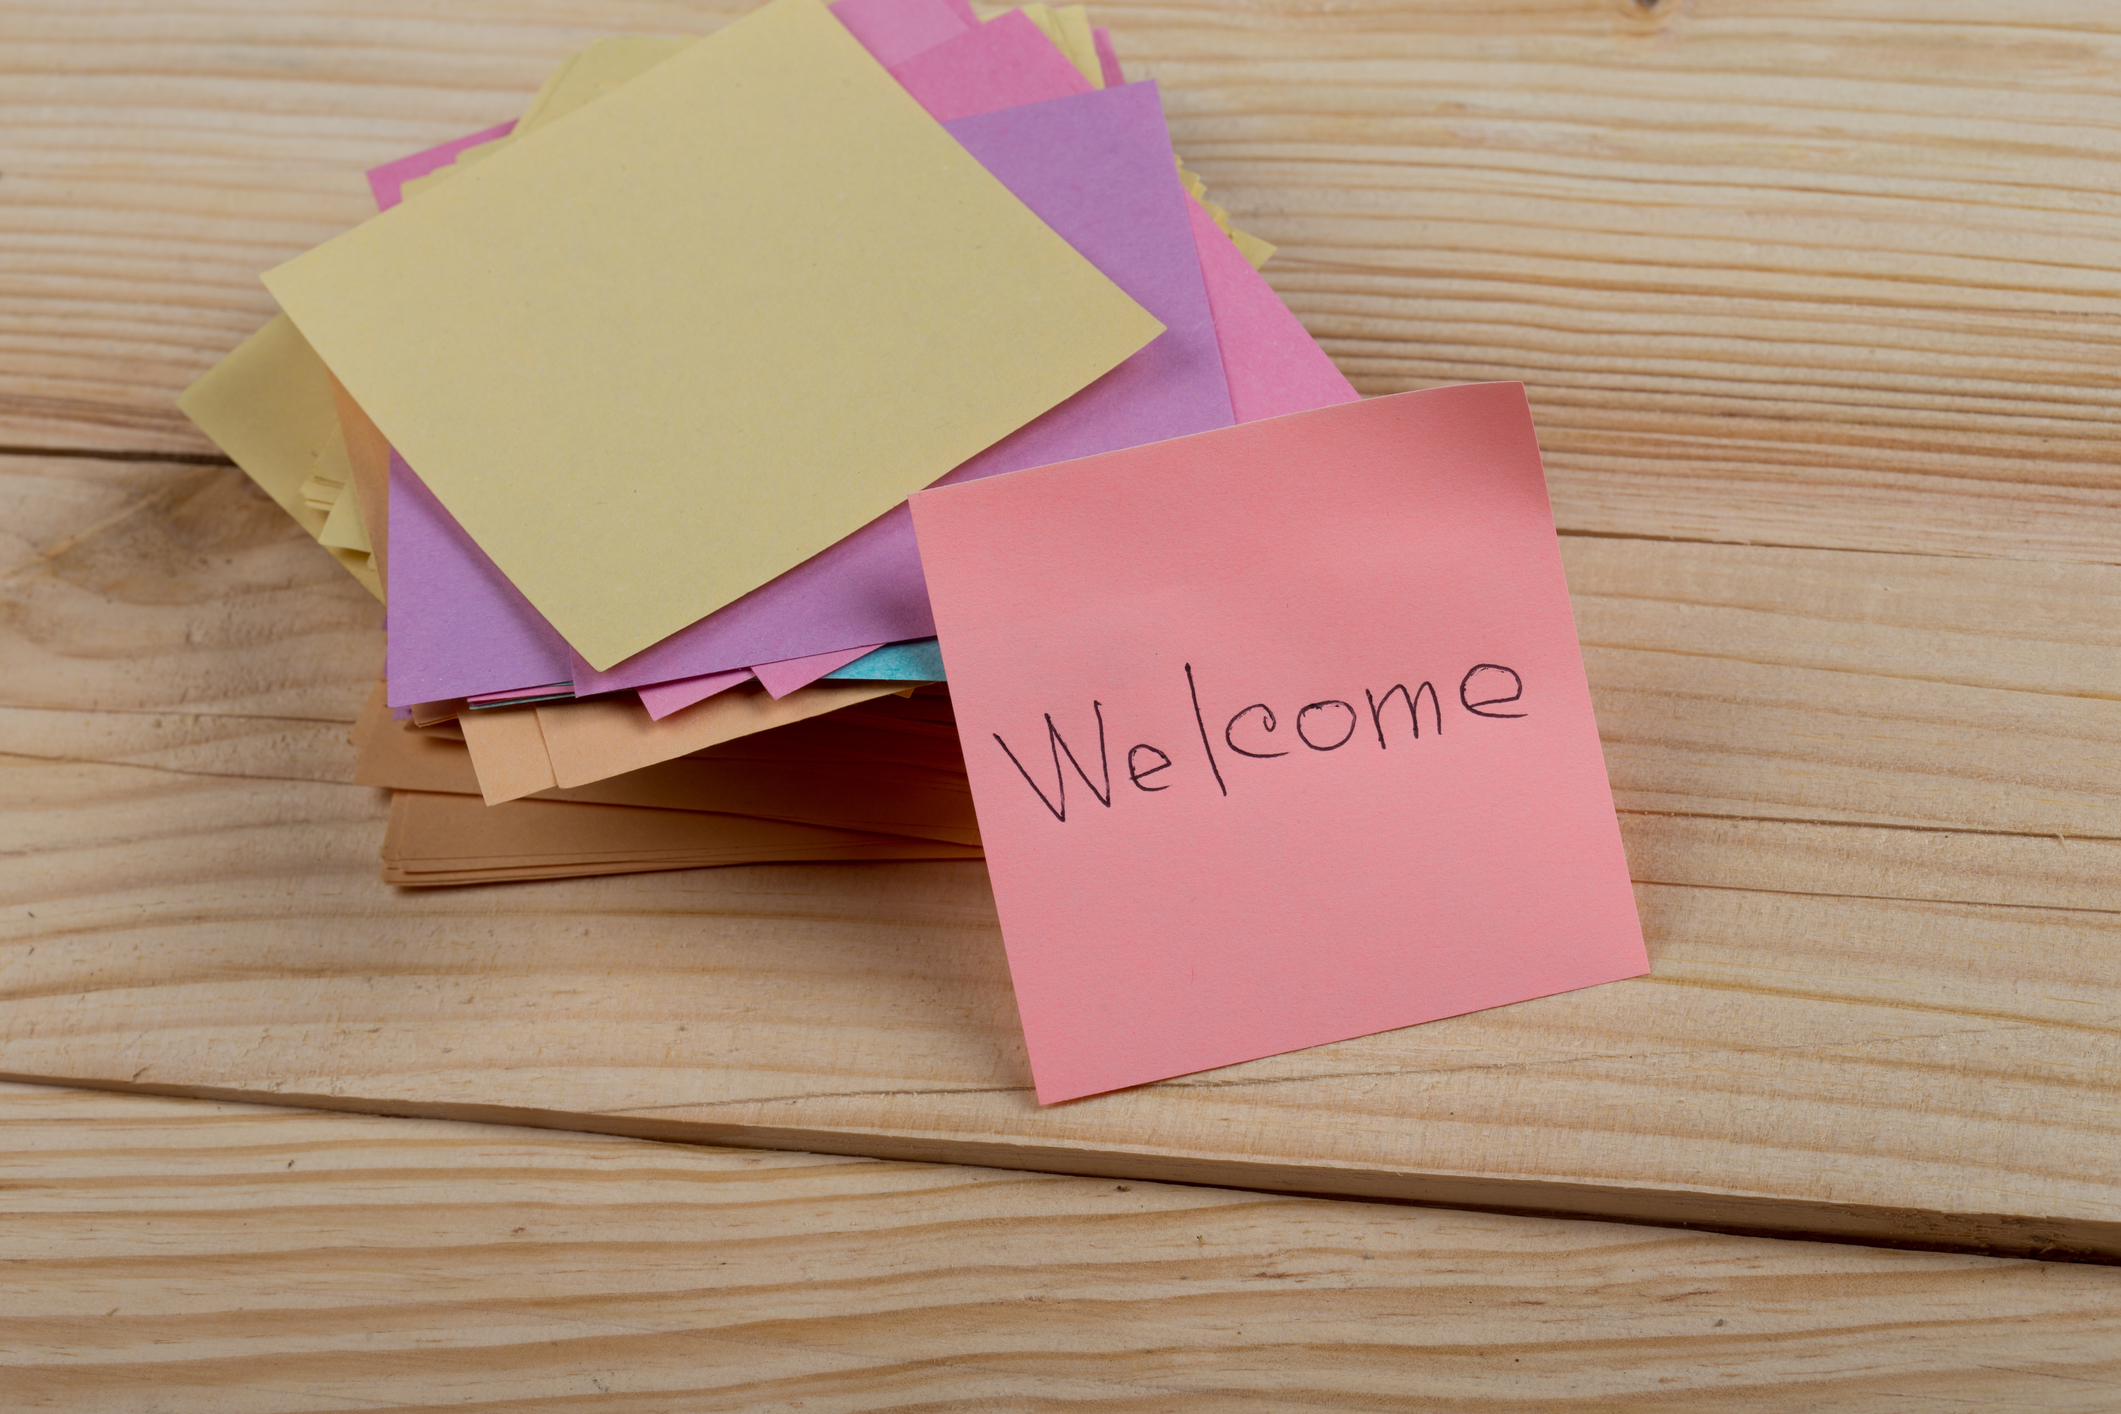 dreamstime_m_144001488.jpg (greeting concept - The text "Welcome" written...